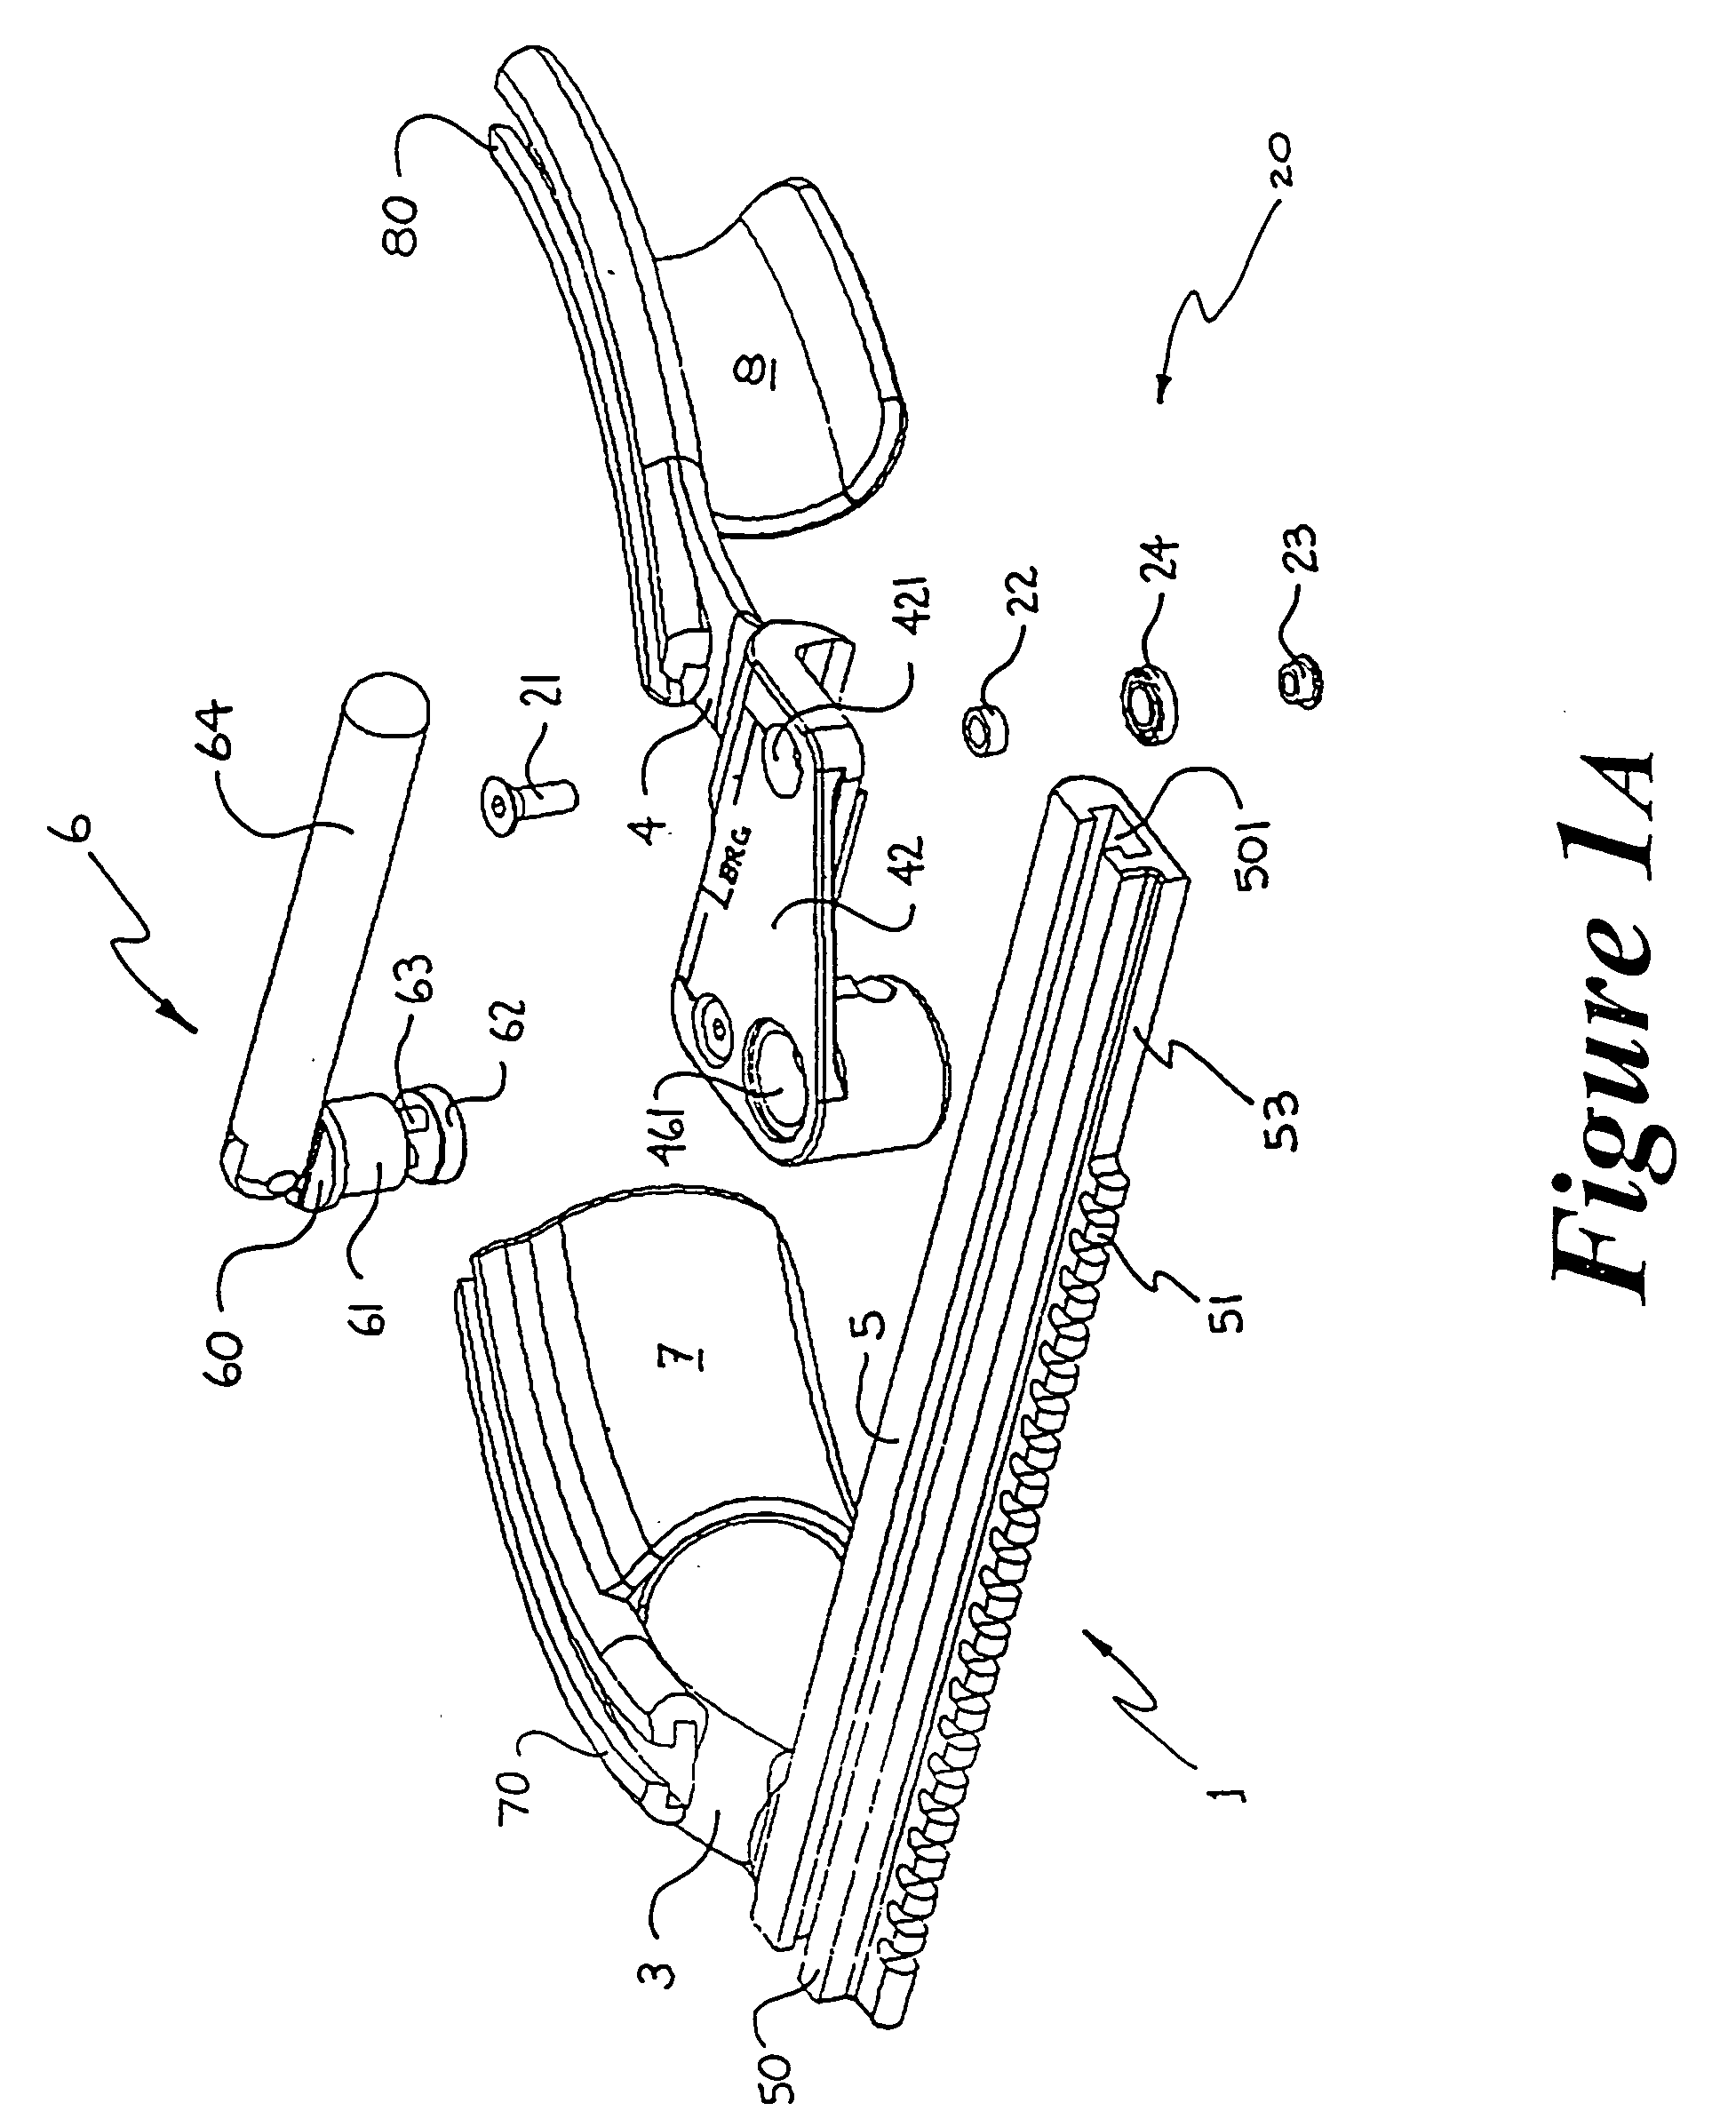 Surgical retractor having low-friction actuating means and contoured blade arms